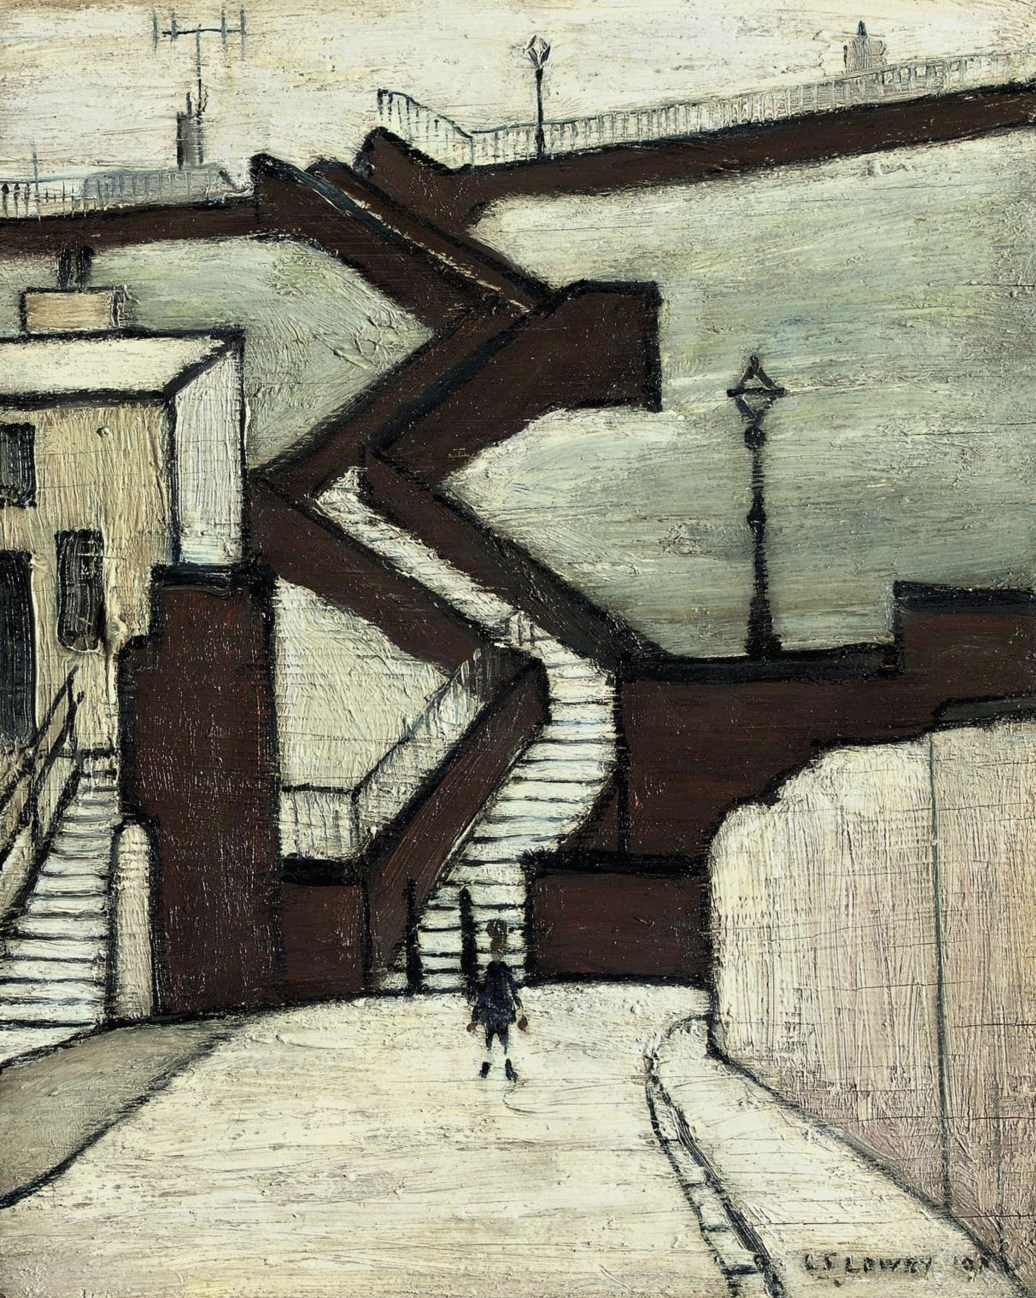 Study for The Steps, Maryport (1956) by Laurence Stephen Lowry (1887 - 1976), English artist.